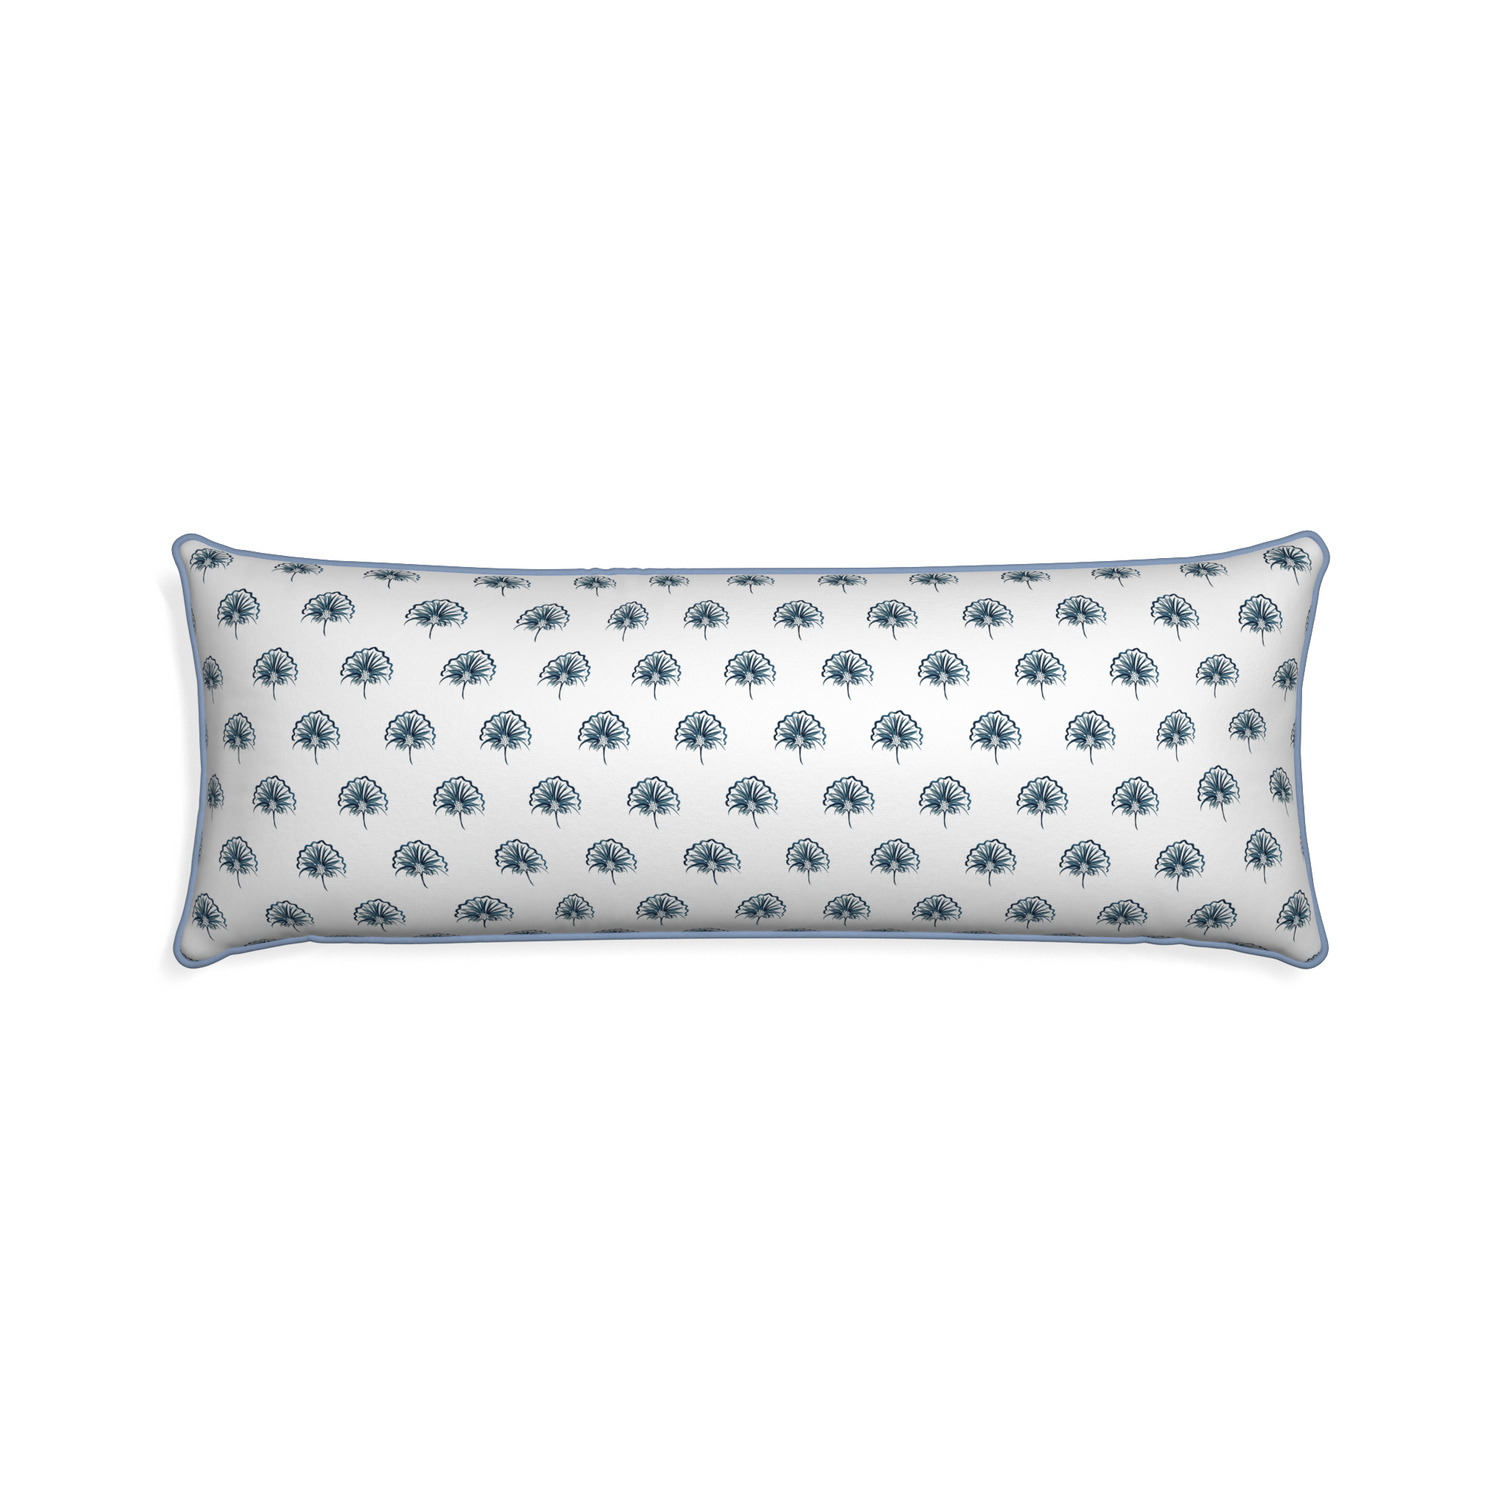 Xl-lumbar penelope midnight custom floral navypillow with sky piping on white background